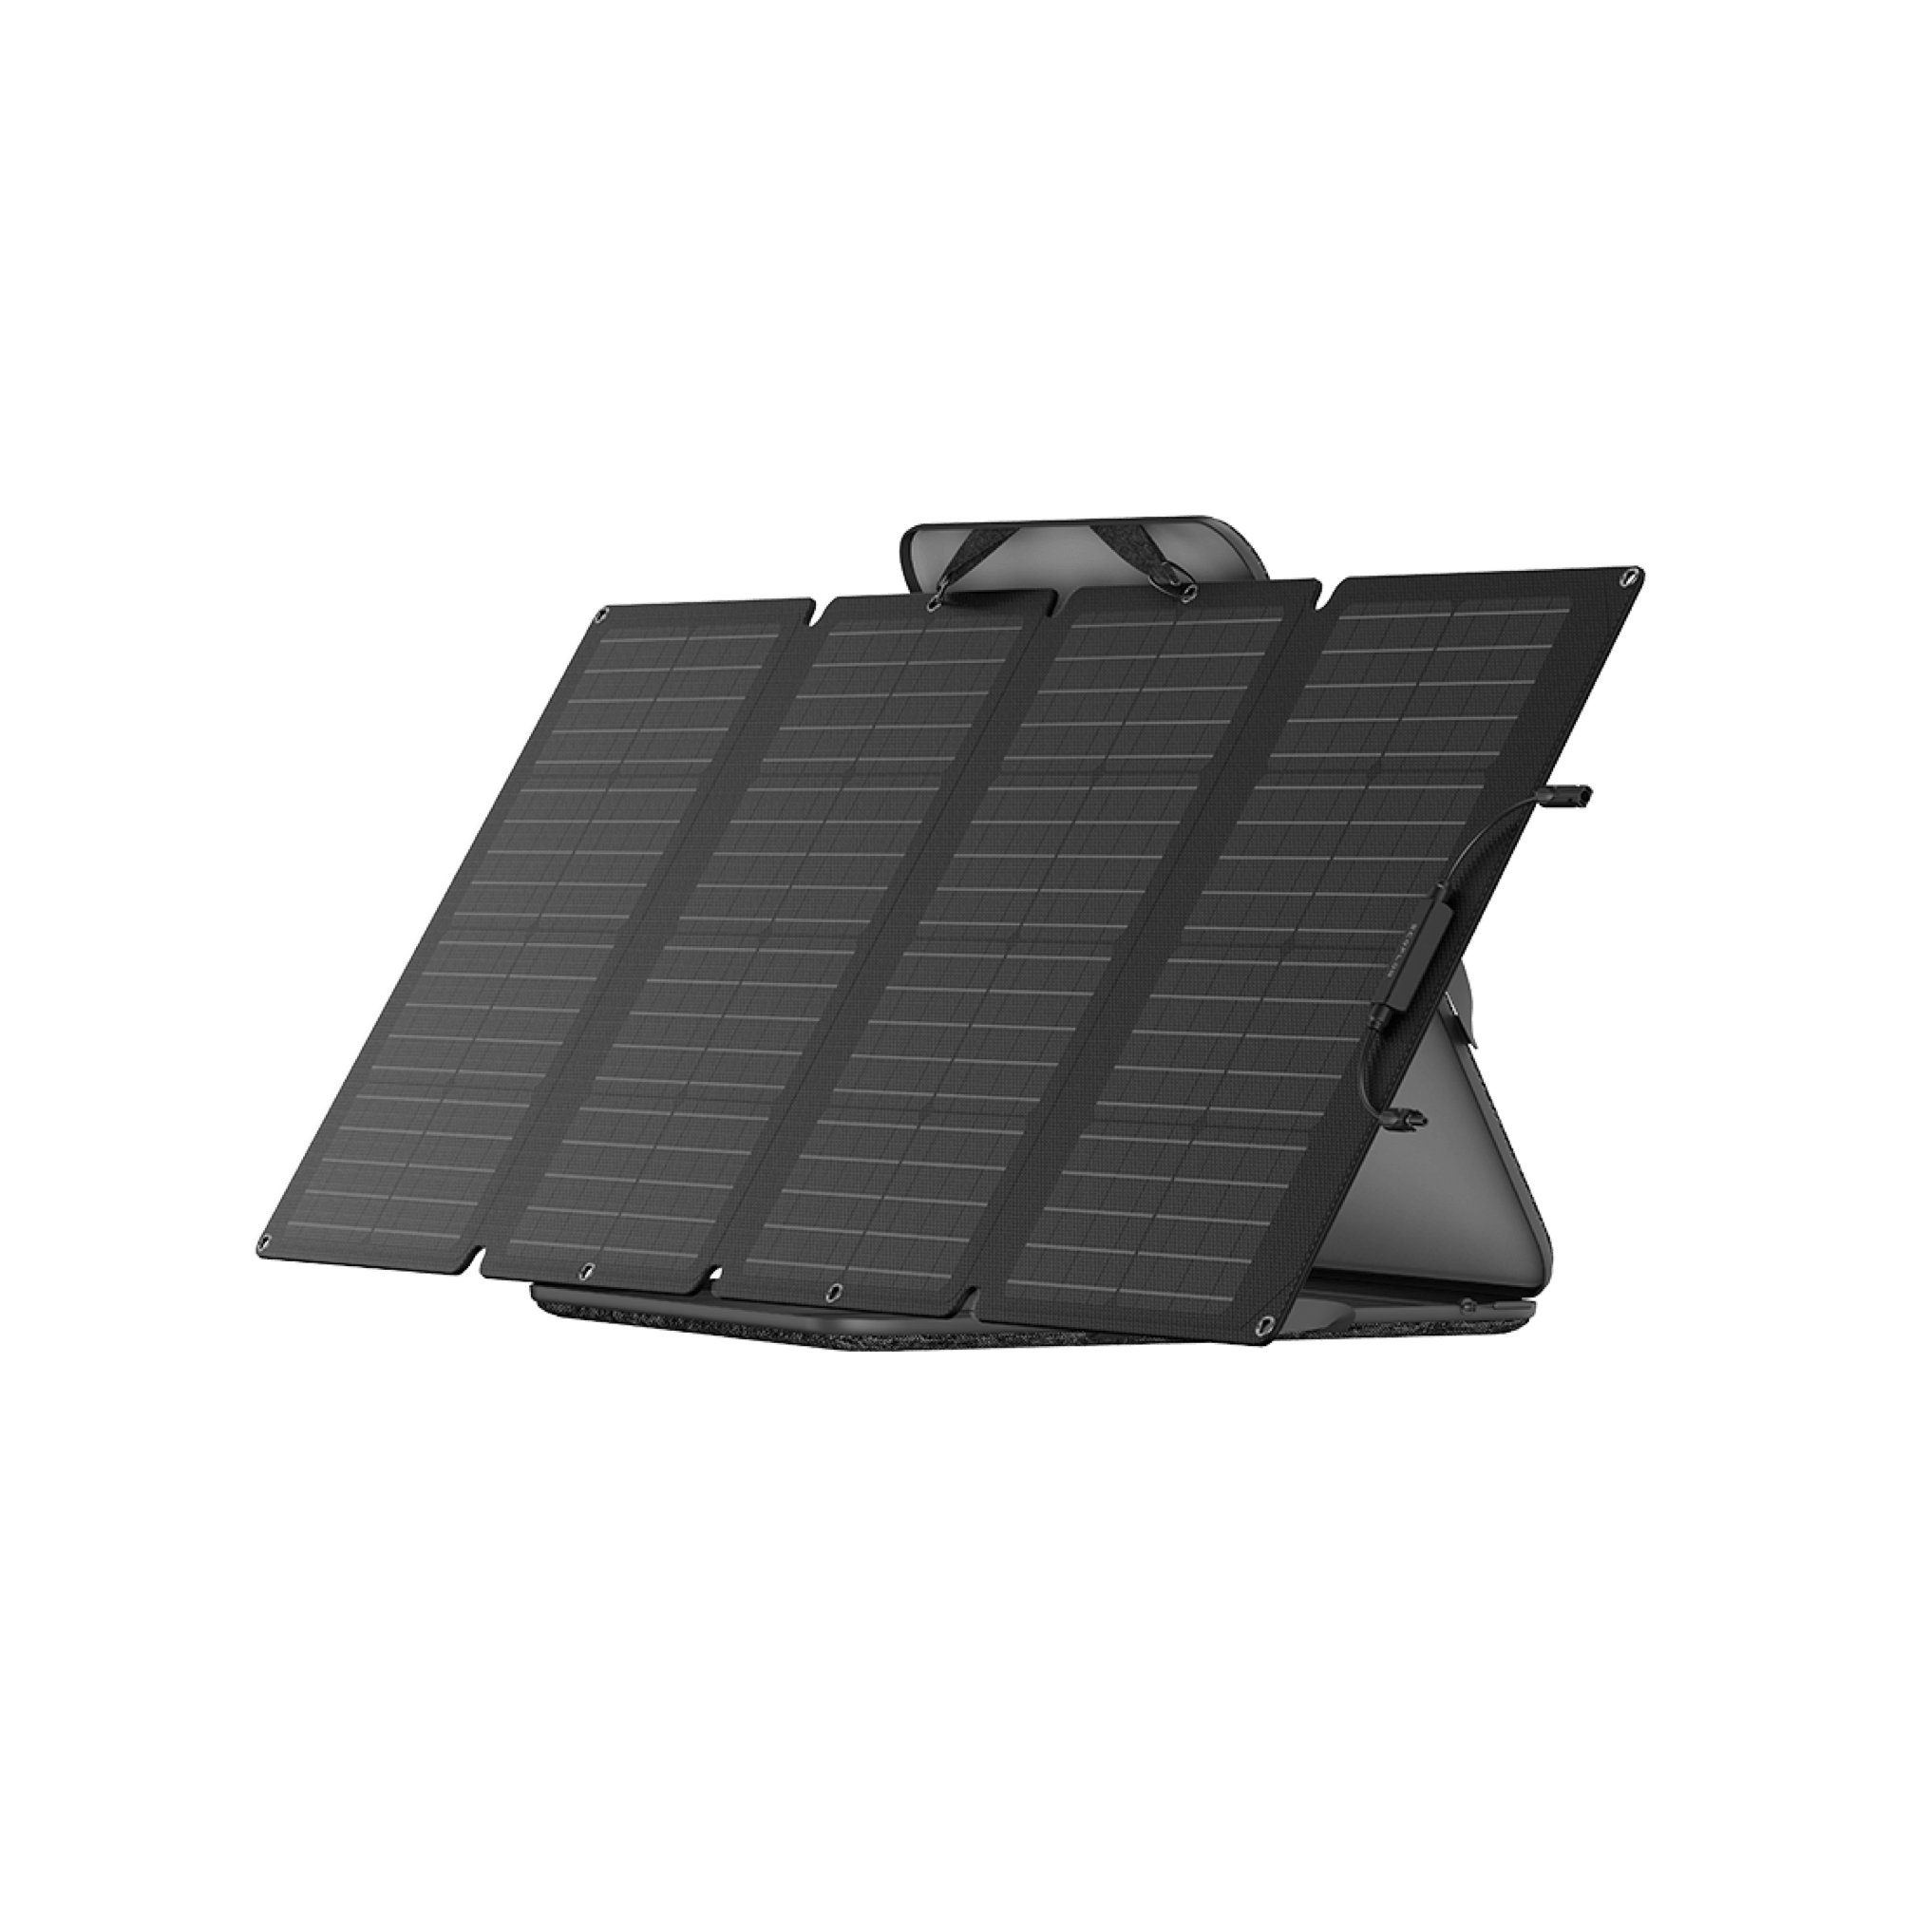 Portable Solar Panel by EcoFlow with 160W Output